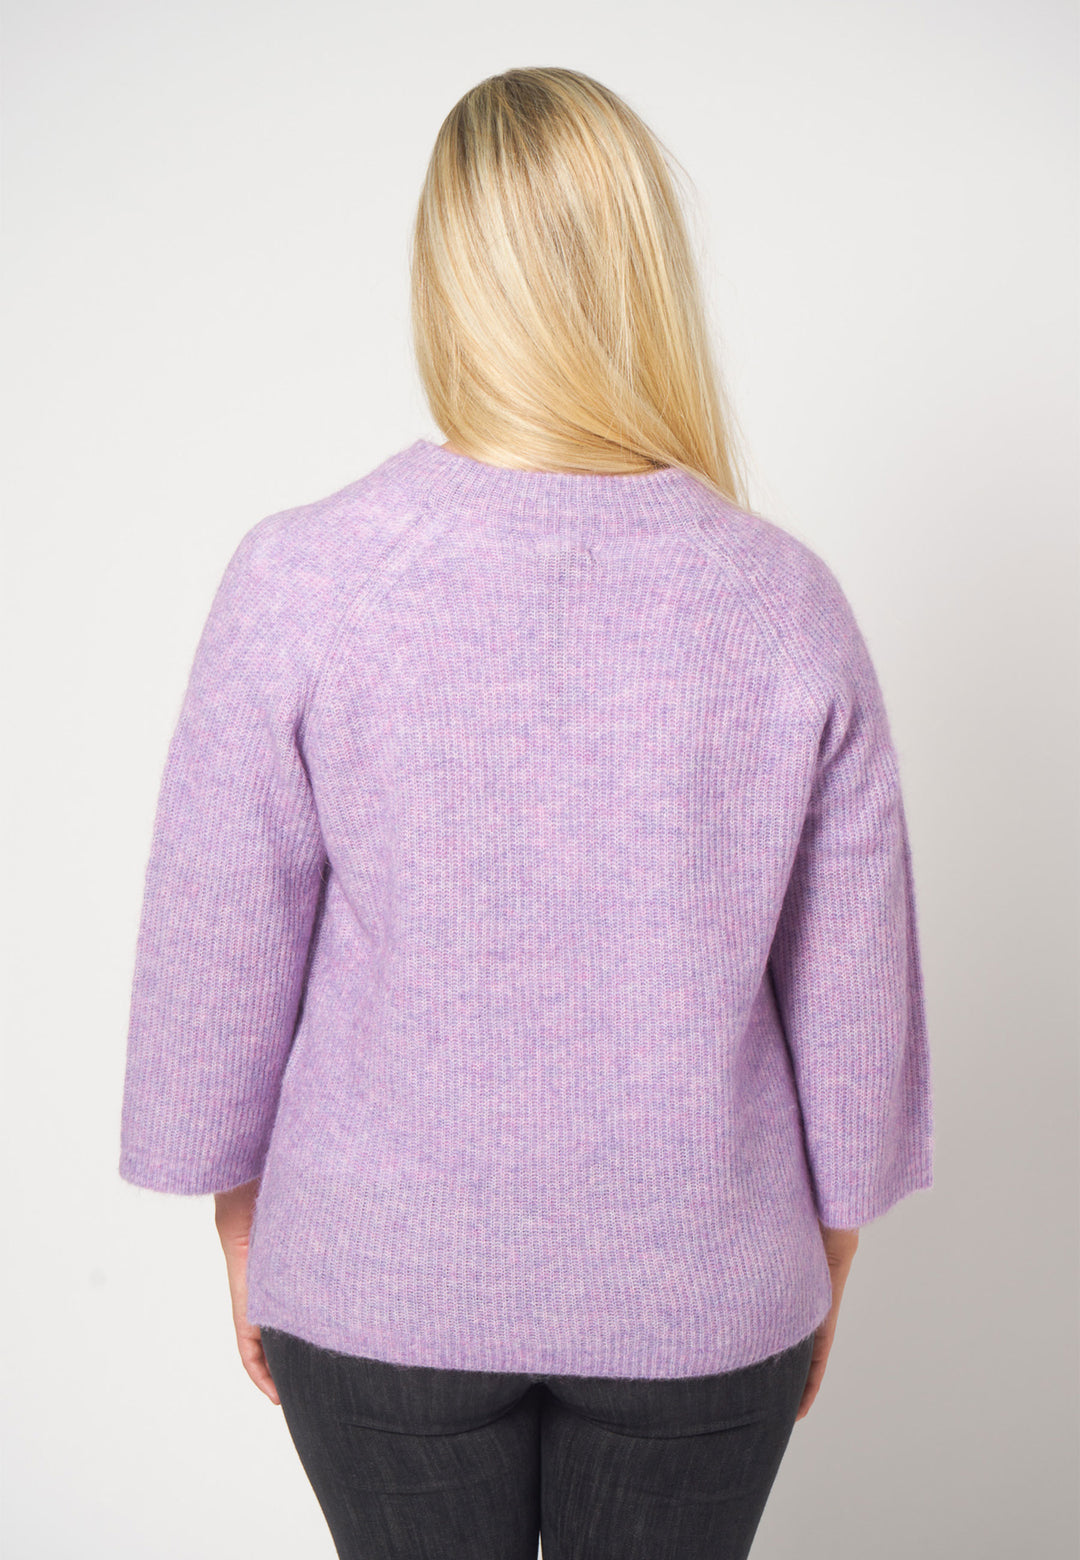 Lind Nelly Knit Pullover 1215 Lavendel